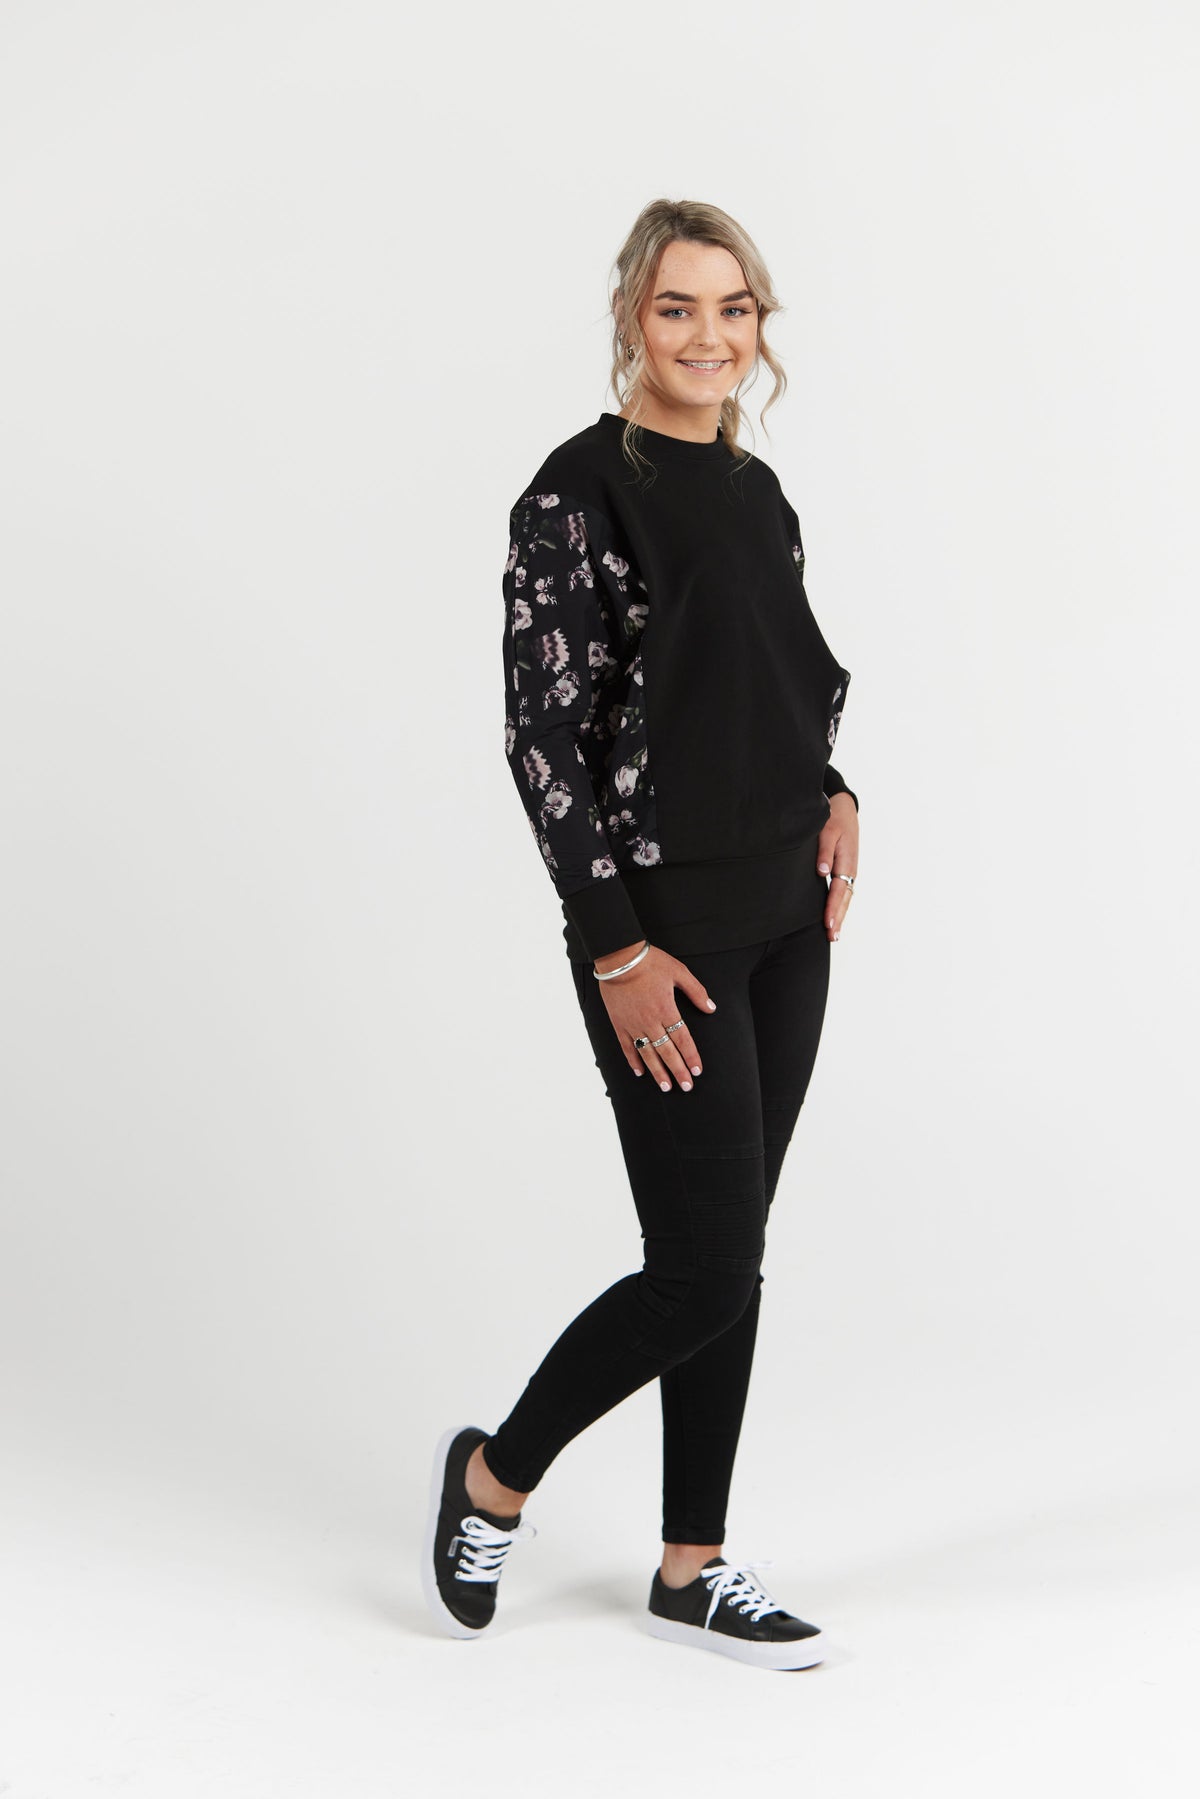 Ava Top Black With Black Floral